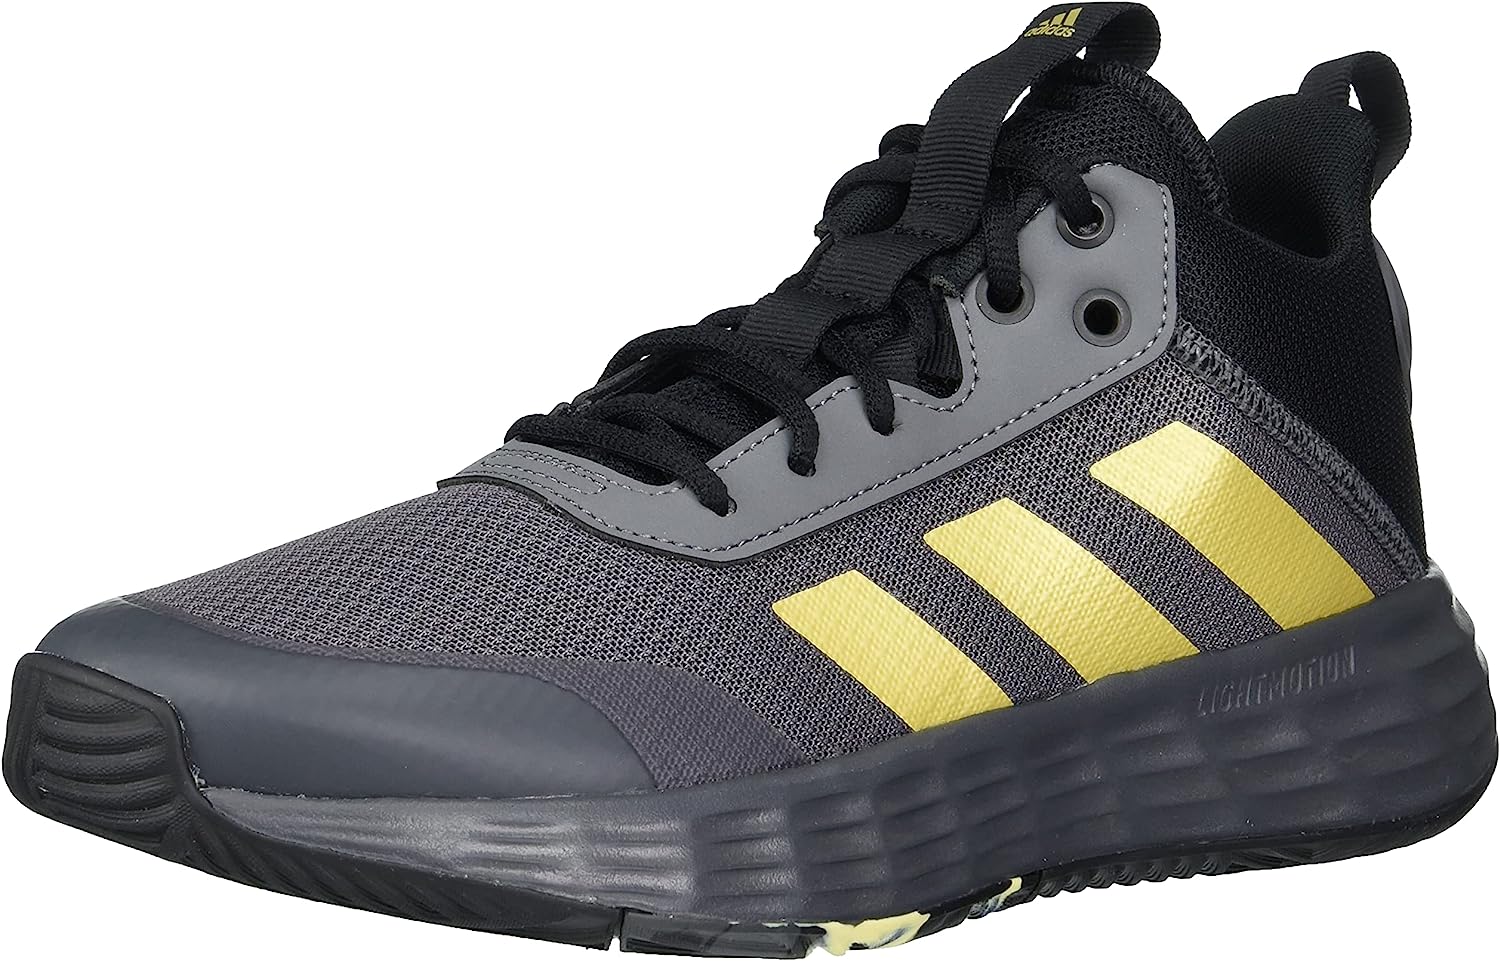 adidas Men's Ownthegame Shoes Basketball